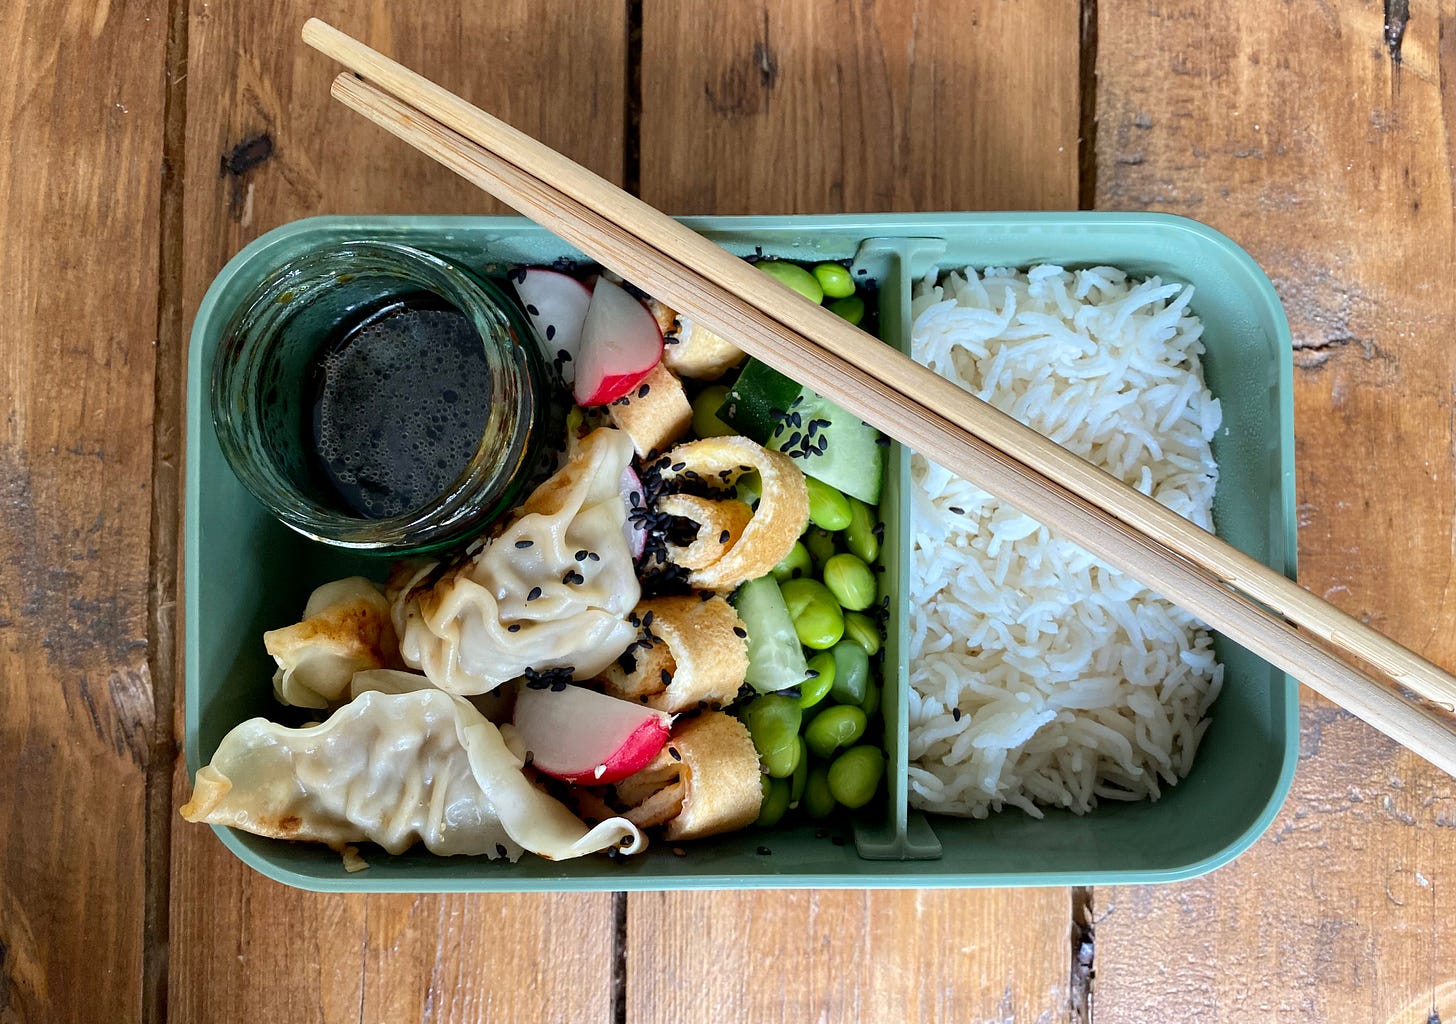 Bento box lunchbox with gyoza, rice, dipping sauce, radishes, and cucumber and edamame